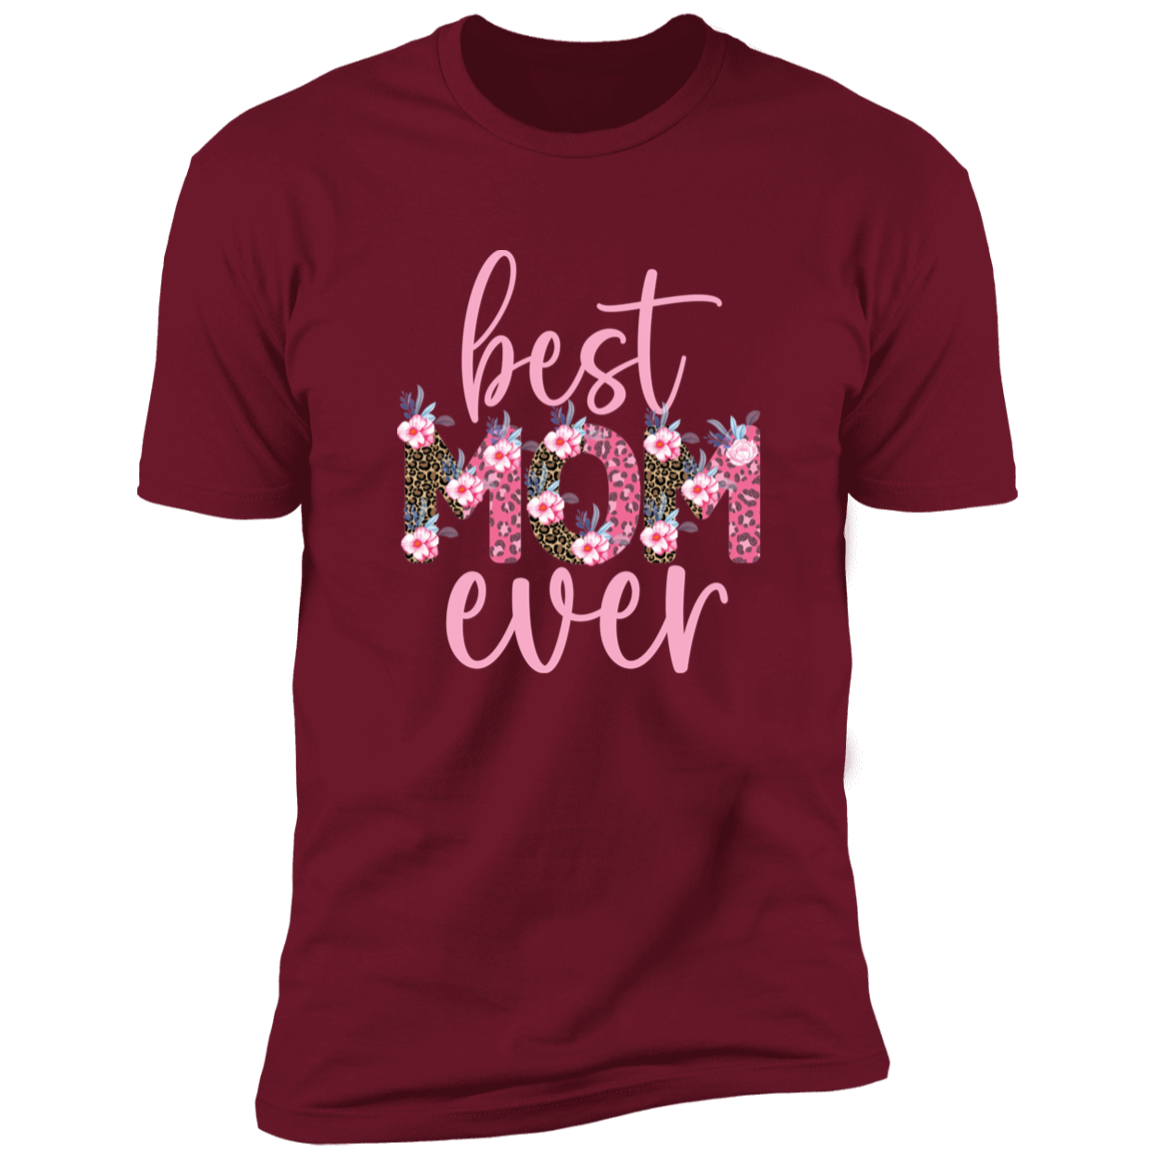 Best Mom Ever T-Shirt | Mother's Day Gifts, Wedding Gift For Mom, Mom birthday gift